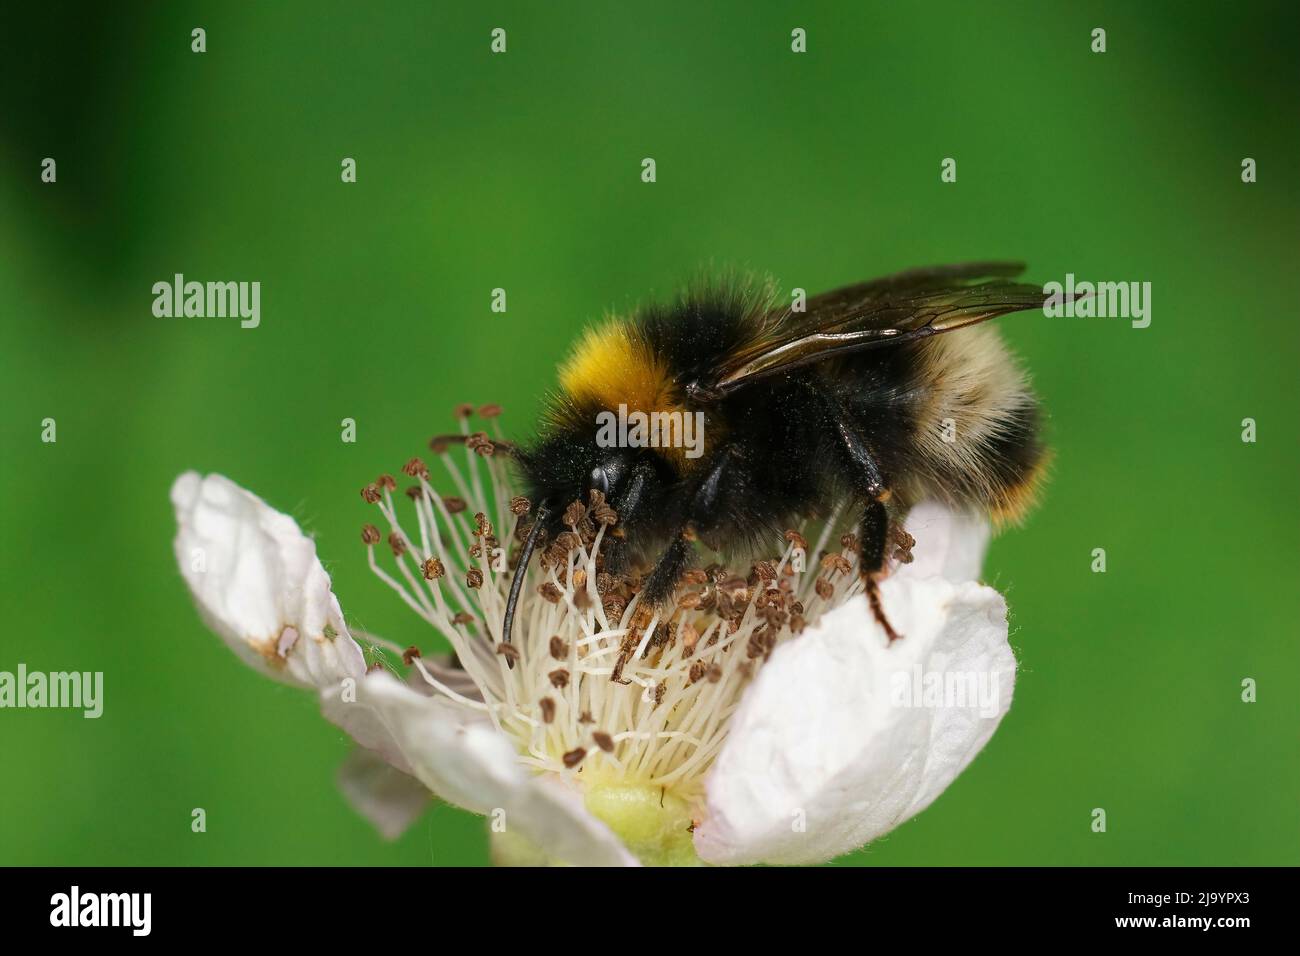 Closeup on a large Forest cuckoo bumblebee , Bombus sylvestris, sitting on a white brambleburry flower, Rubus fructicosus Stock Photo